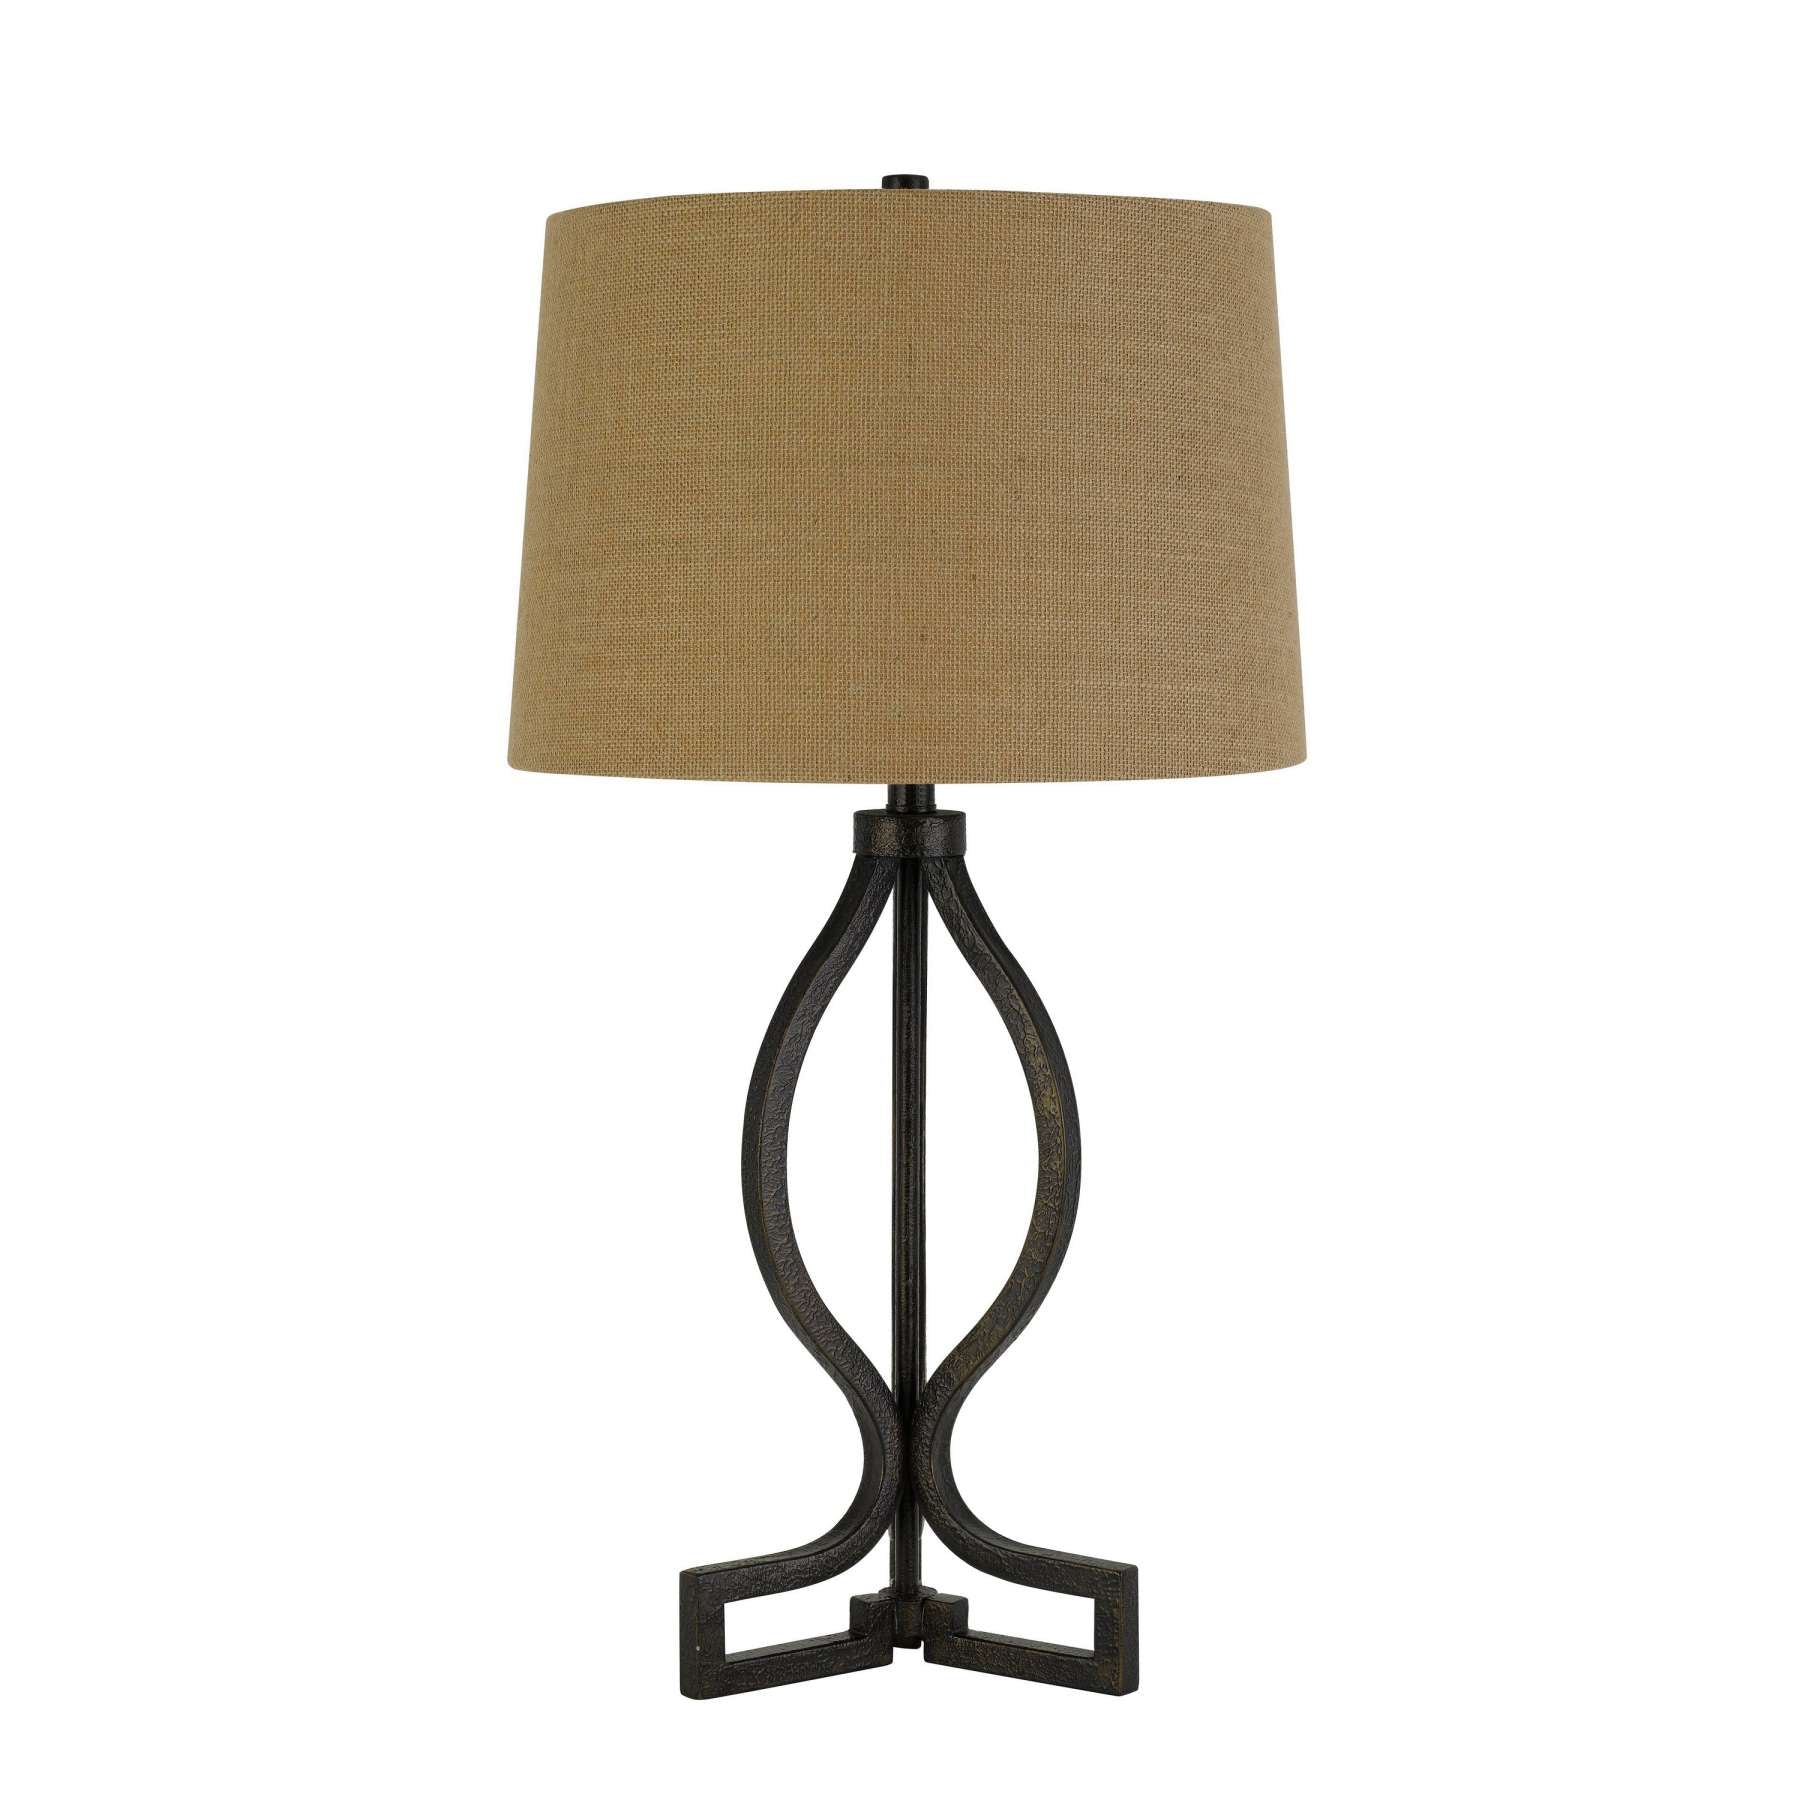 150 Watt Fabric Shade Table Lamp With Scrolled Metal Base, Beige And Bronze By Benzara